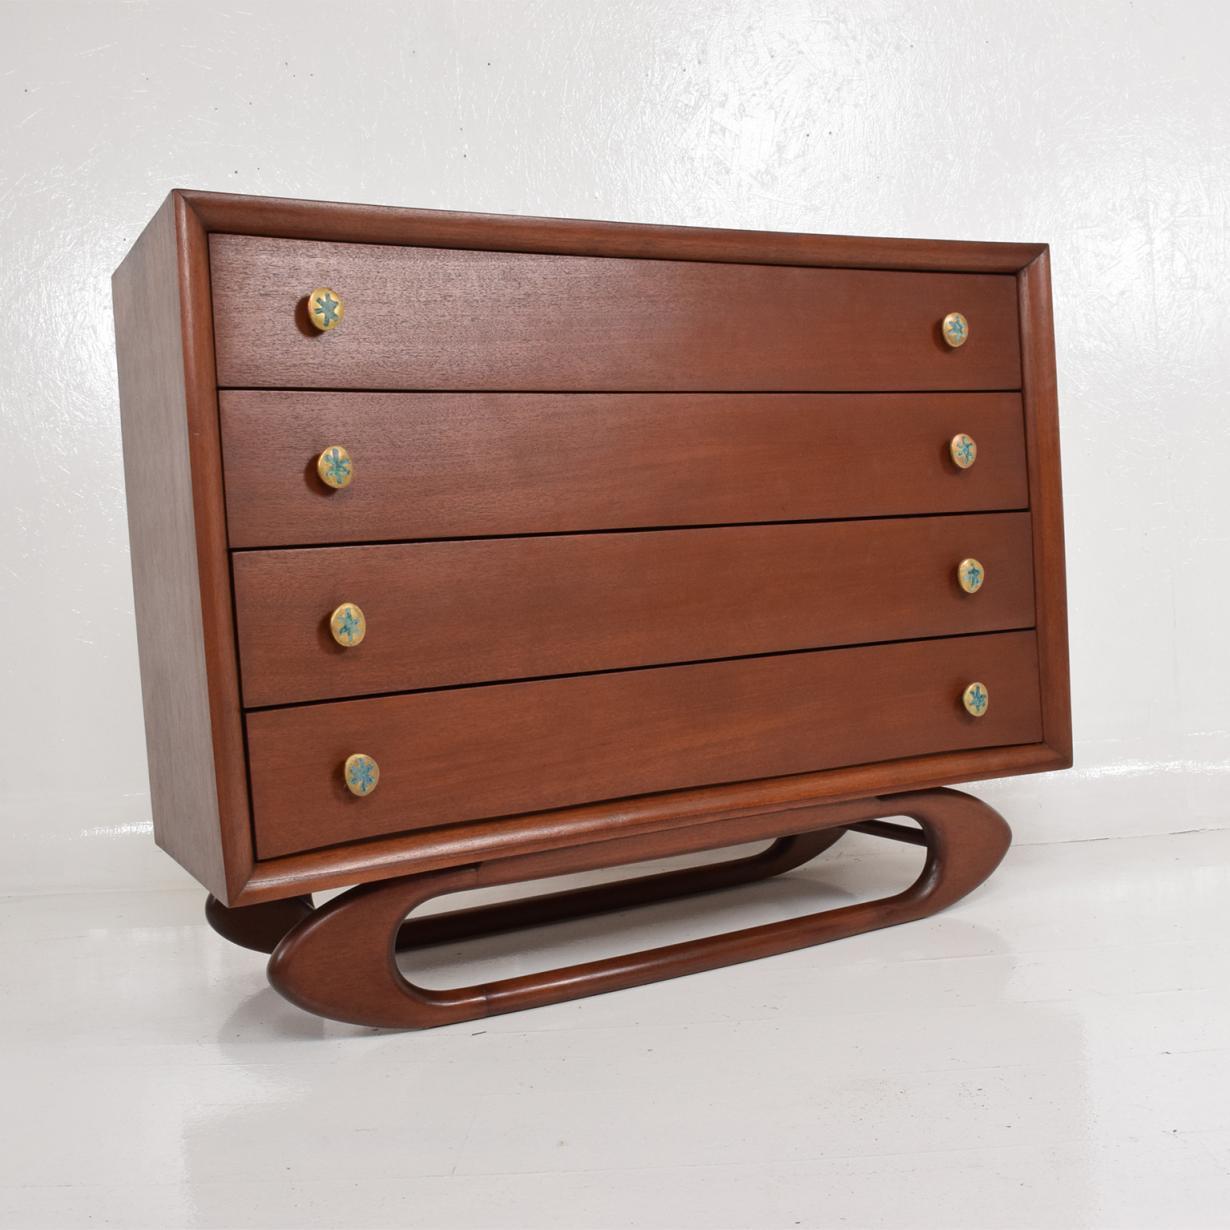 Mahogany Midcentury Mexican Modernist Chest of Drawers Dresser Frank Kyle Pepe Mendoza